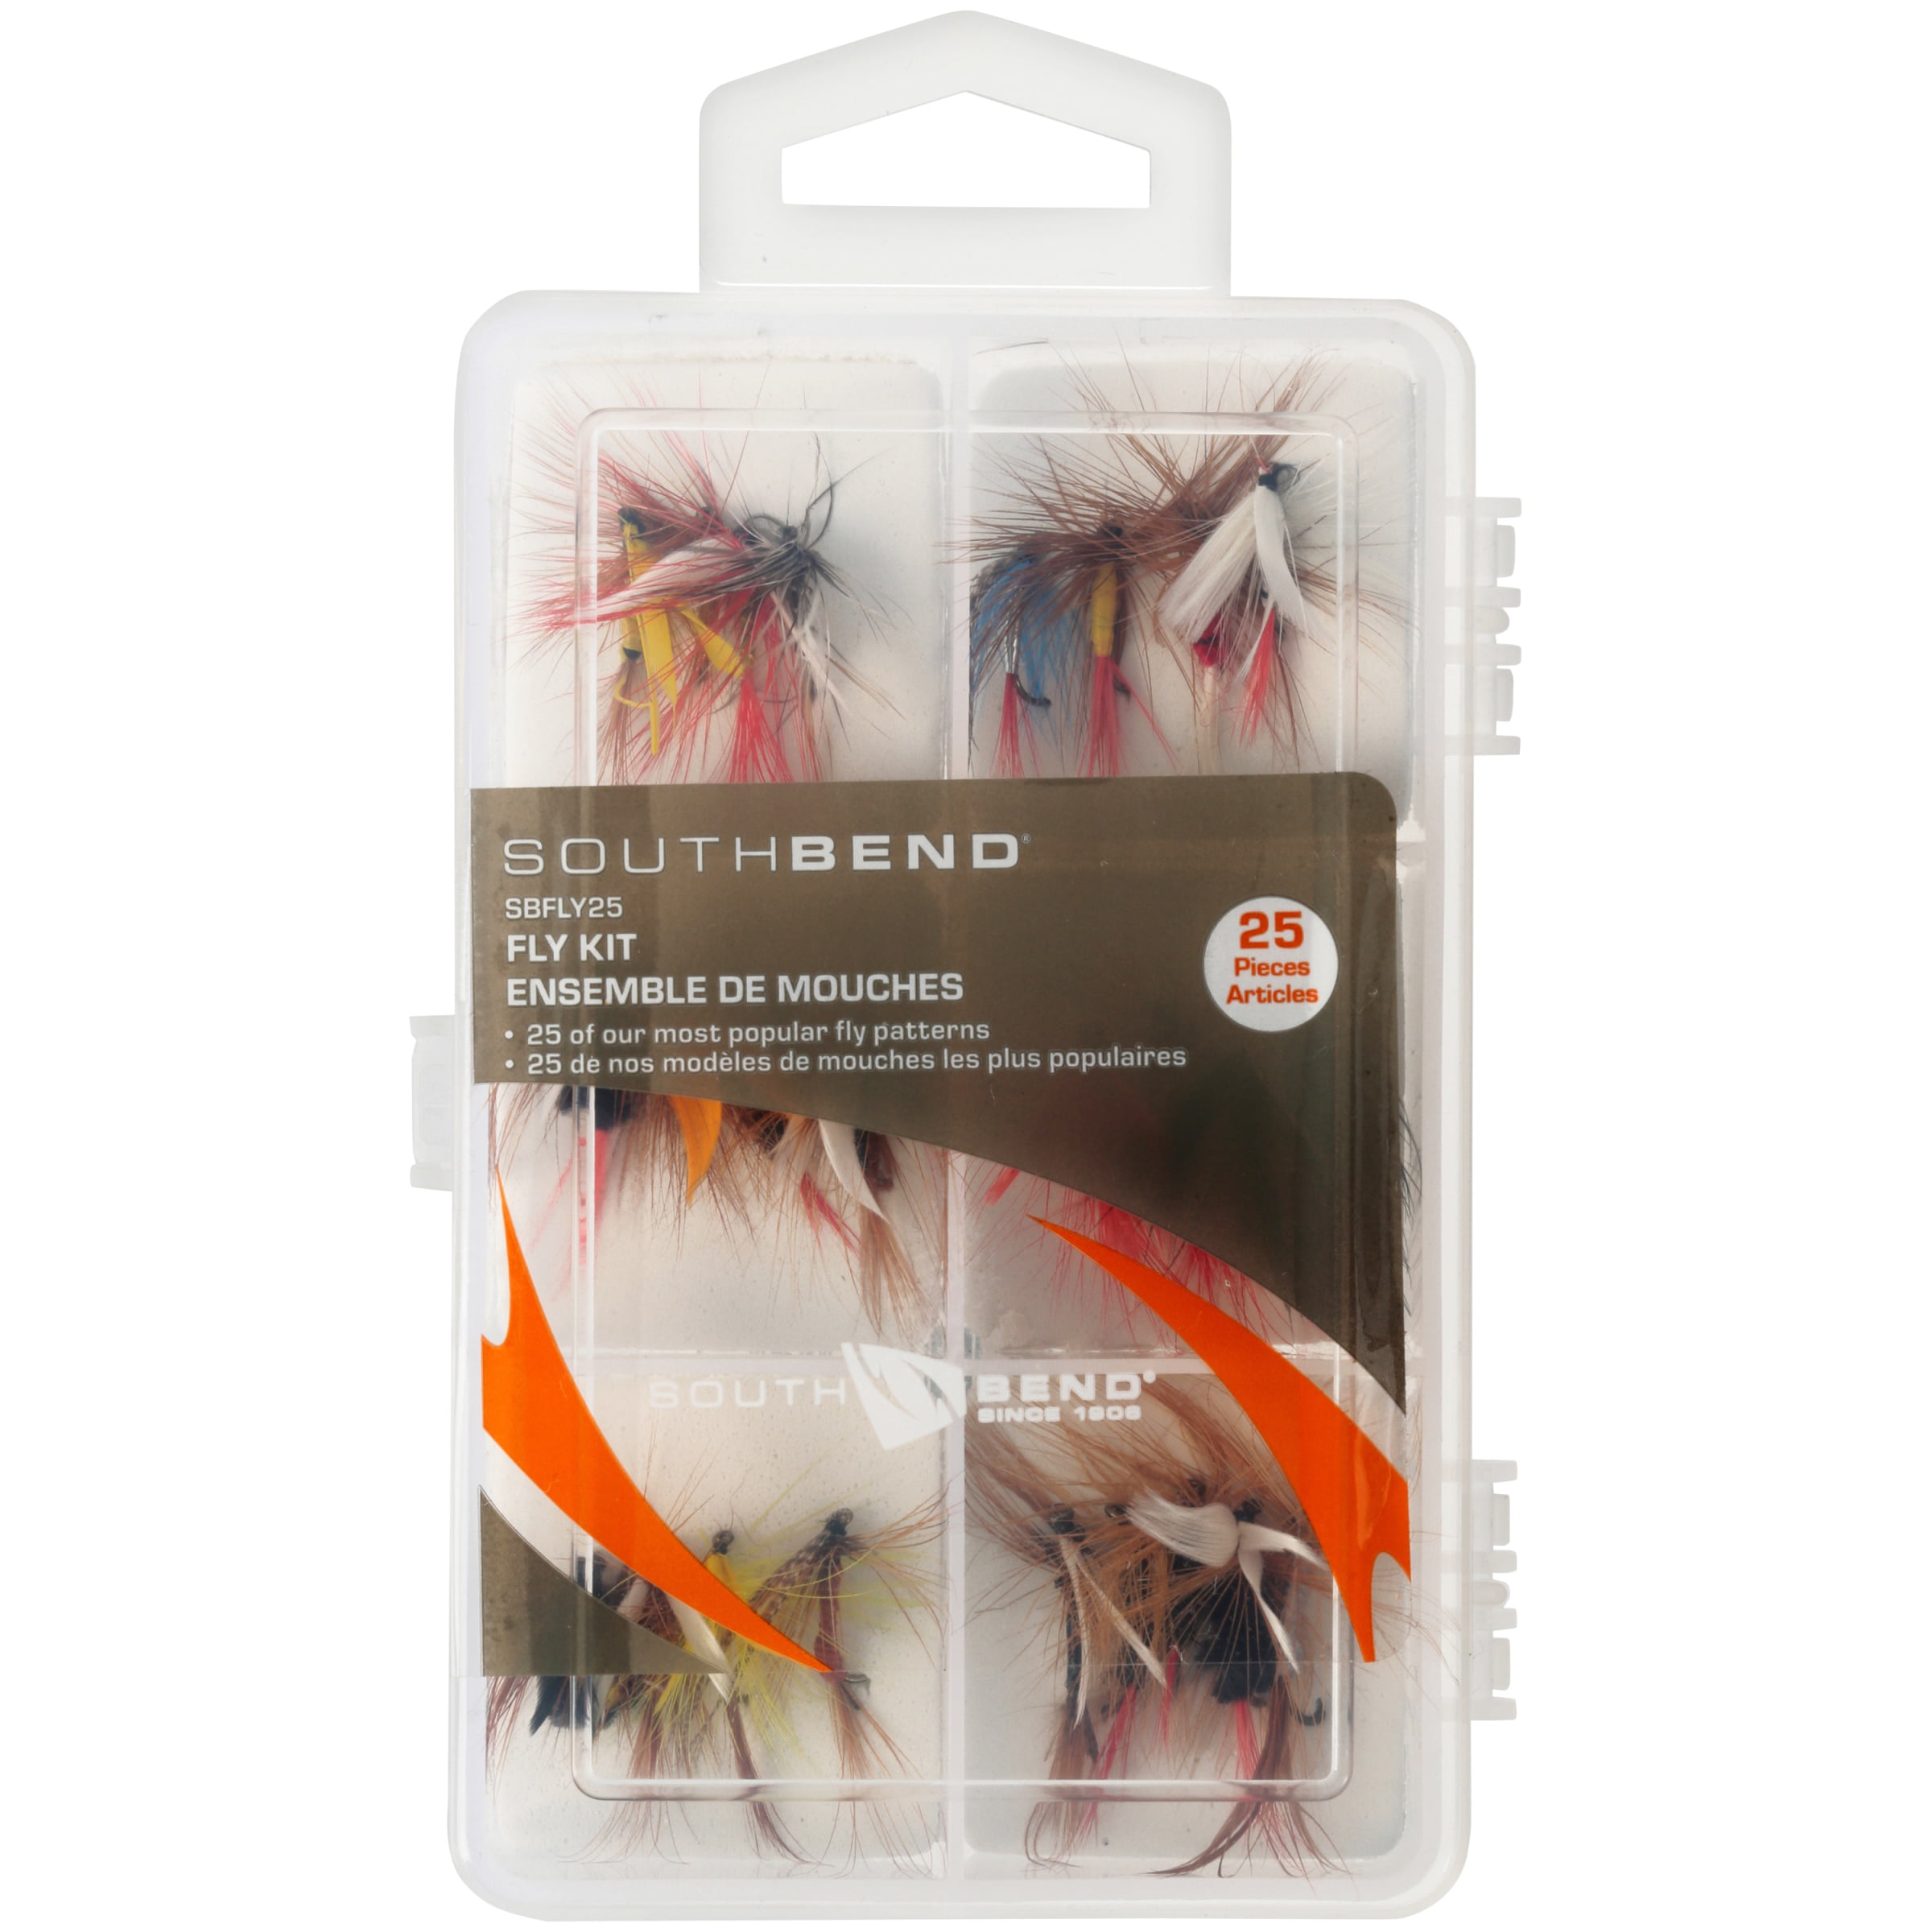 South Bend Fly Assortment Sbfly25 25 Piece Kit for sale online 